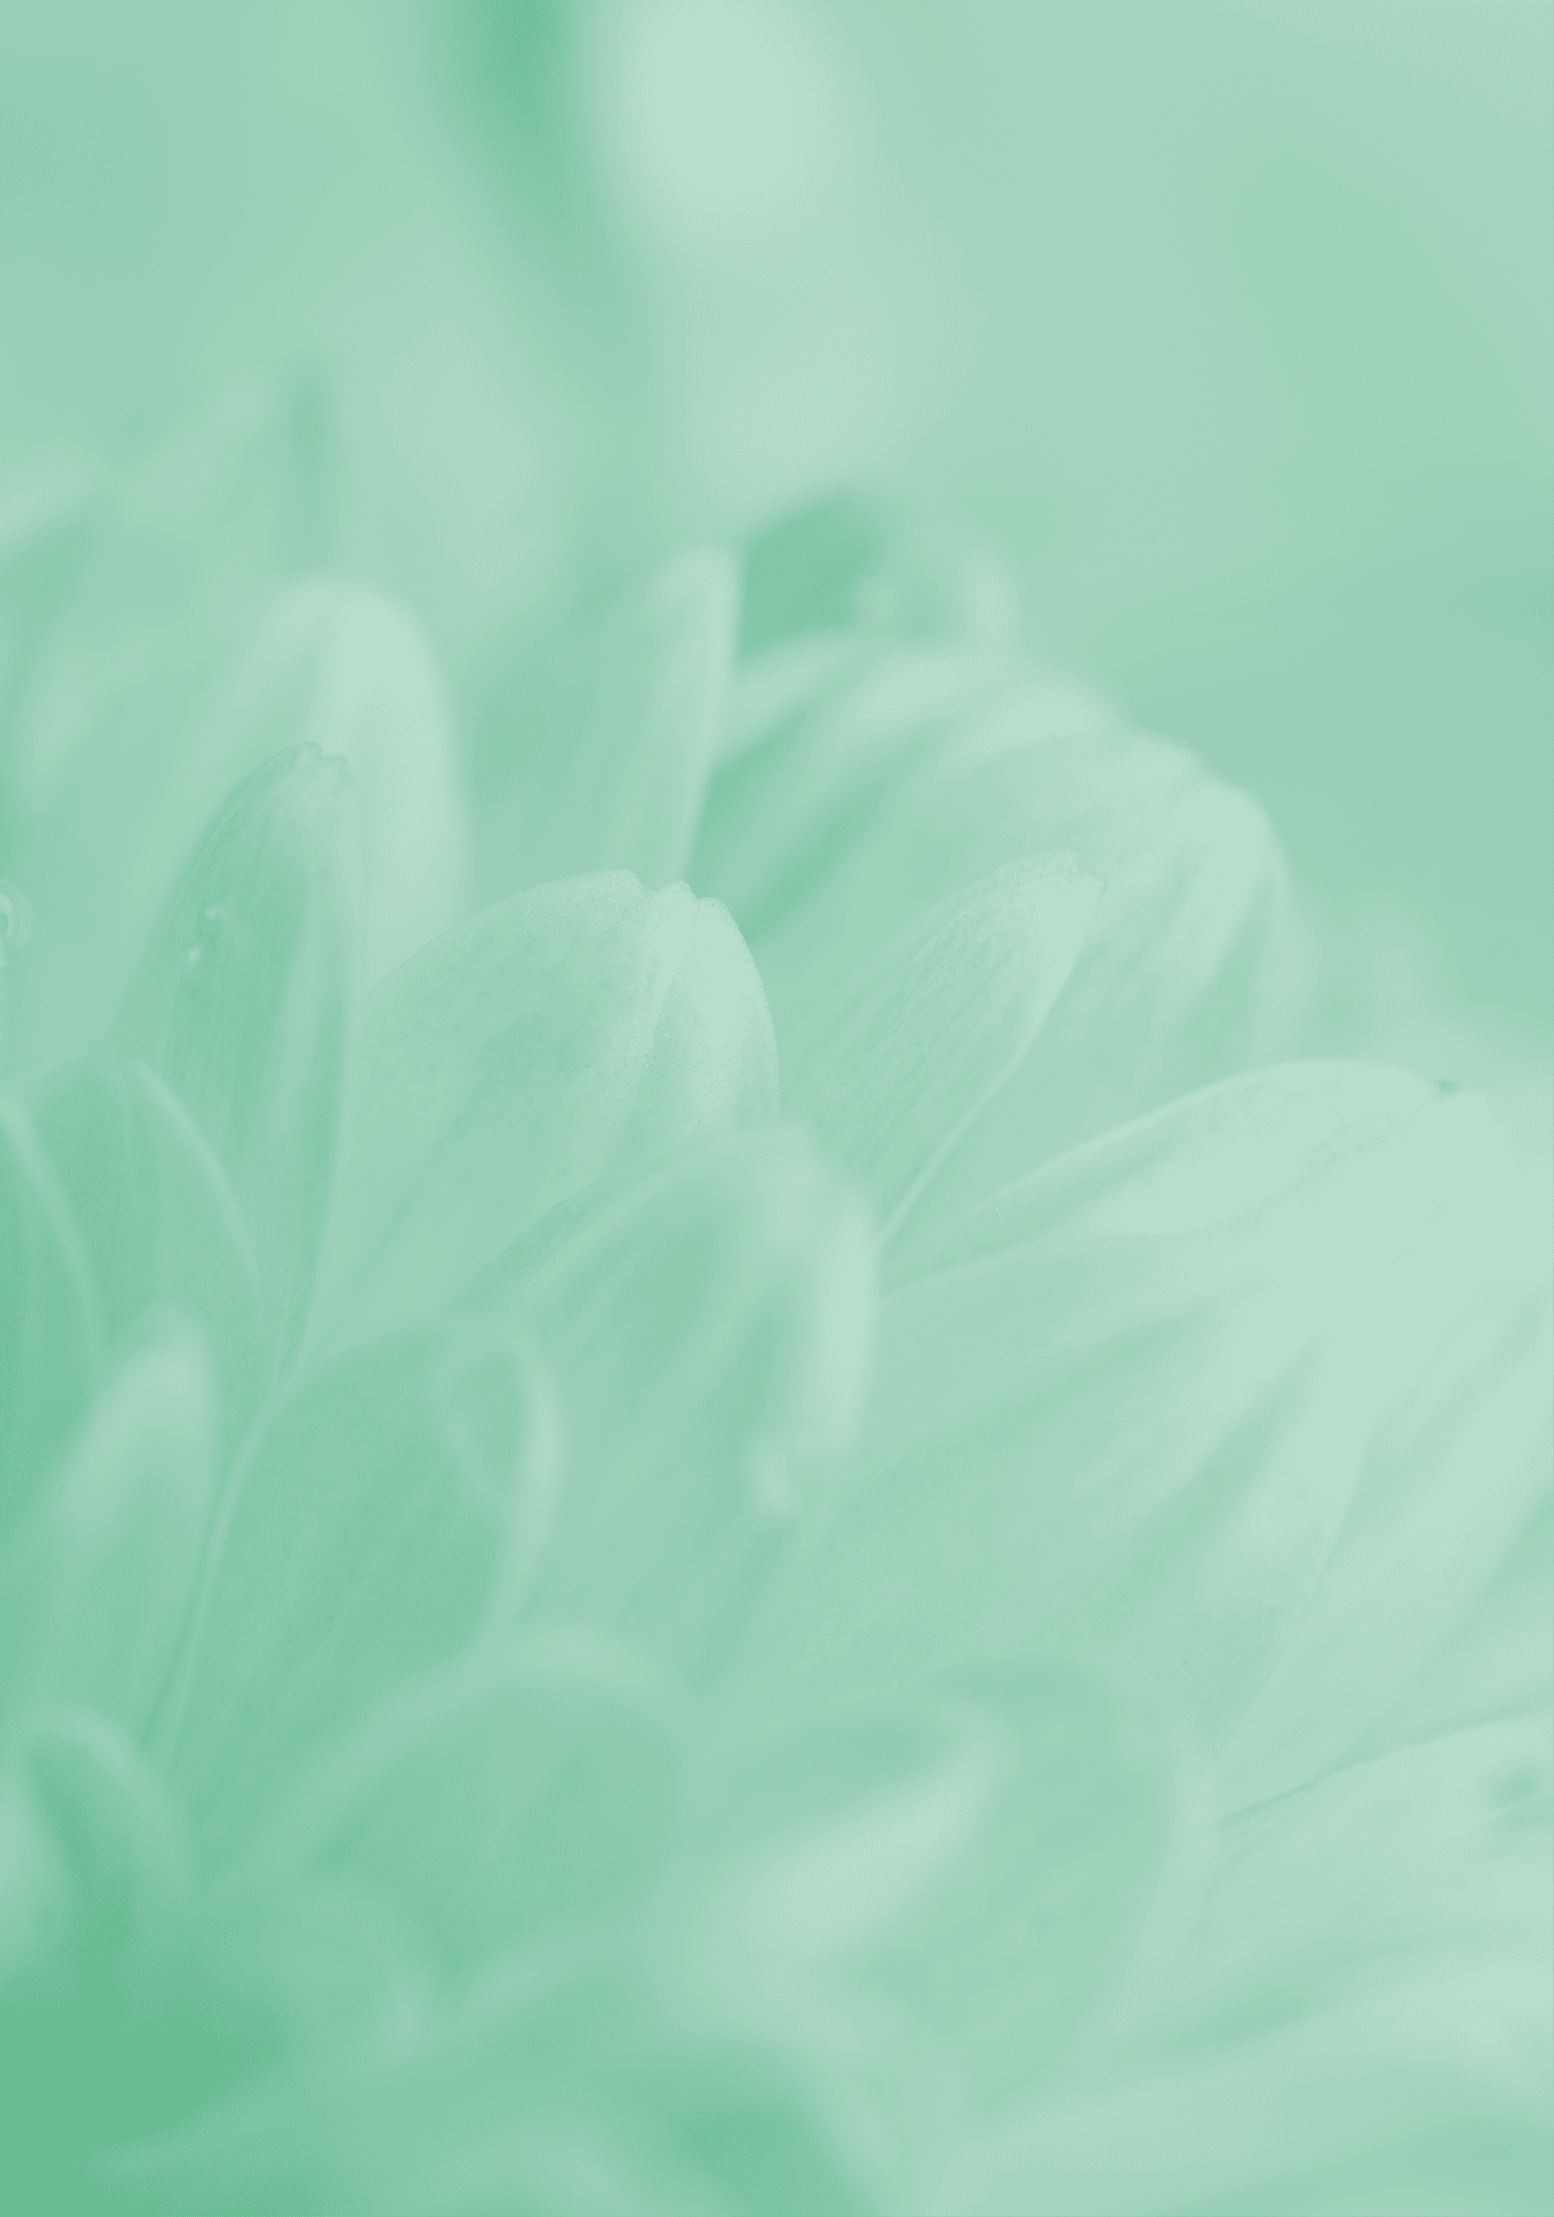 Blurred silhouettes of petals of beautiful white flowers toned in the turquoise color (copy space for your text), soft focus, springtime concept